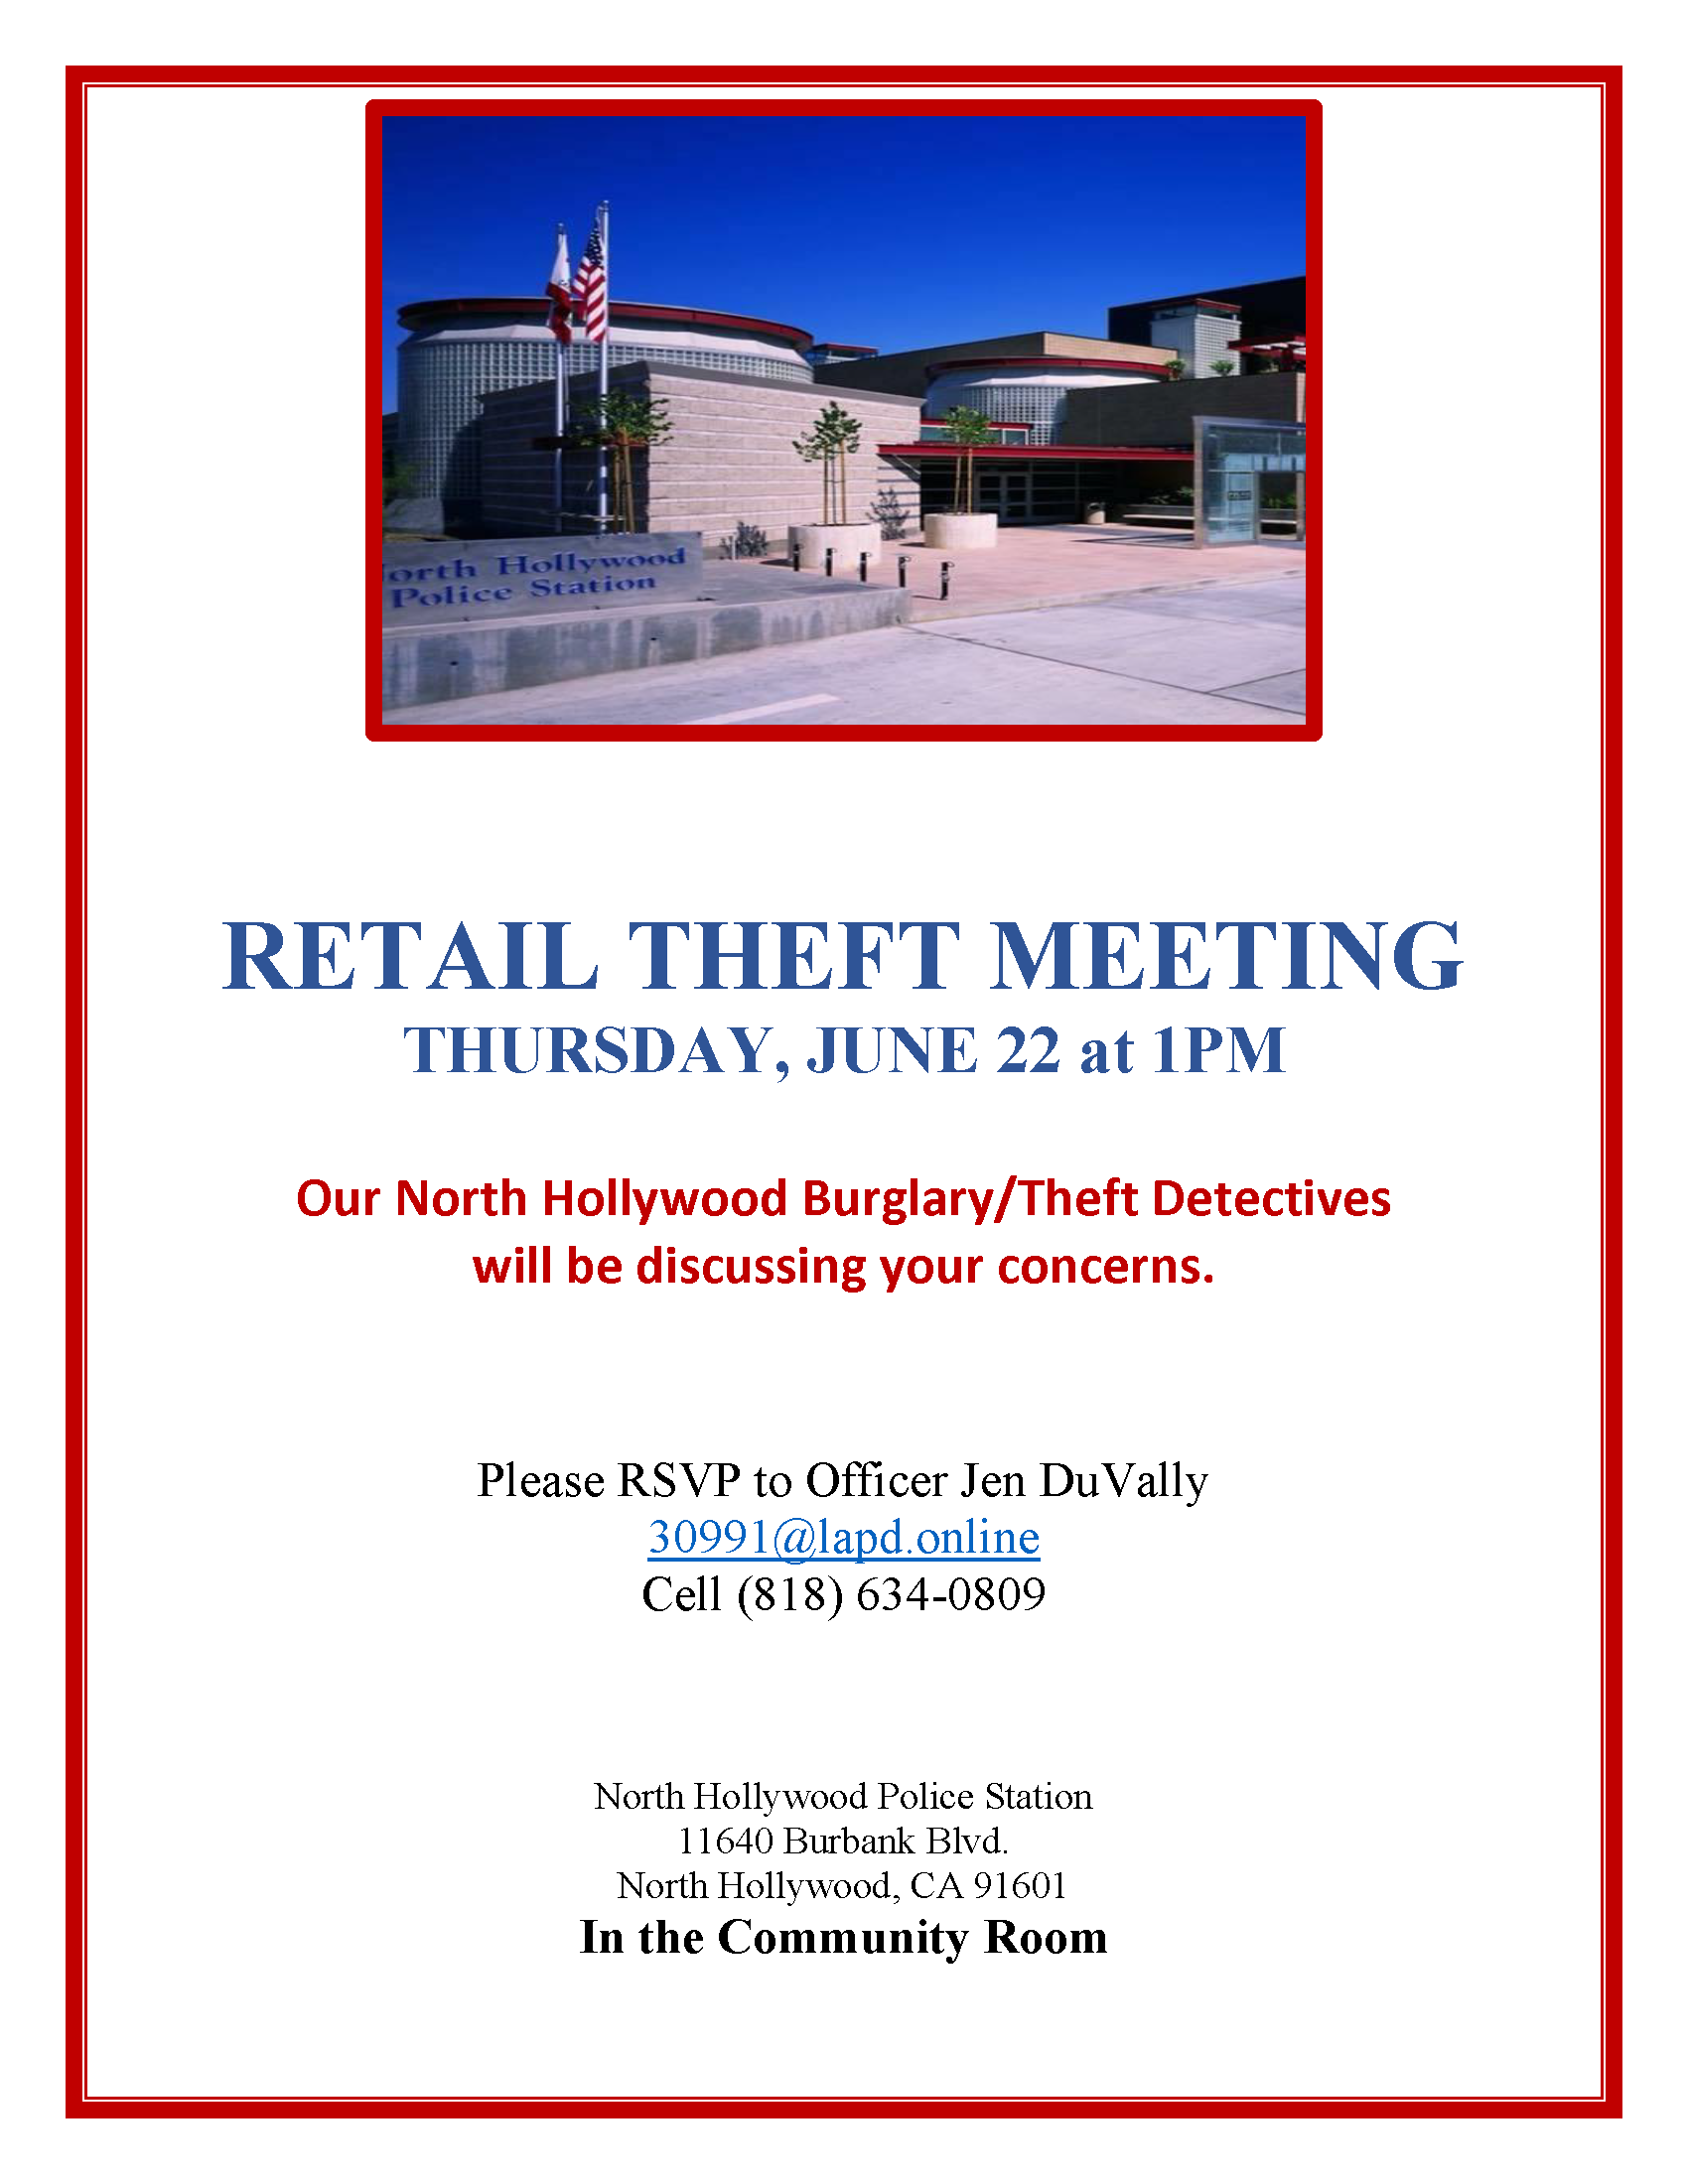 Retail Theft Meeting LAPD North Hollywood Burglary/Theft Detectives 1pm  June 22 click for info